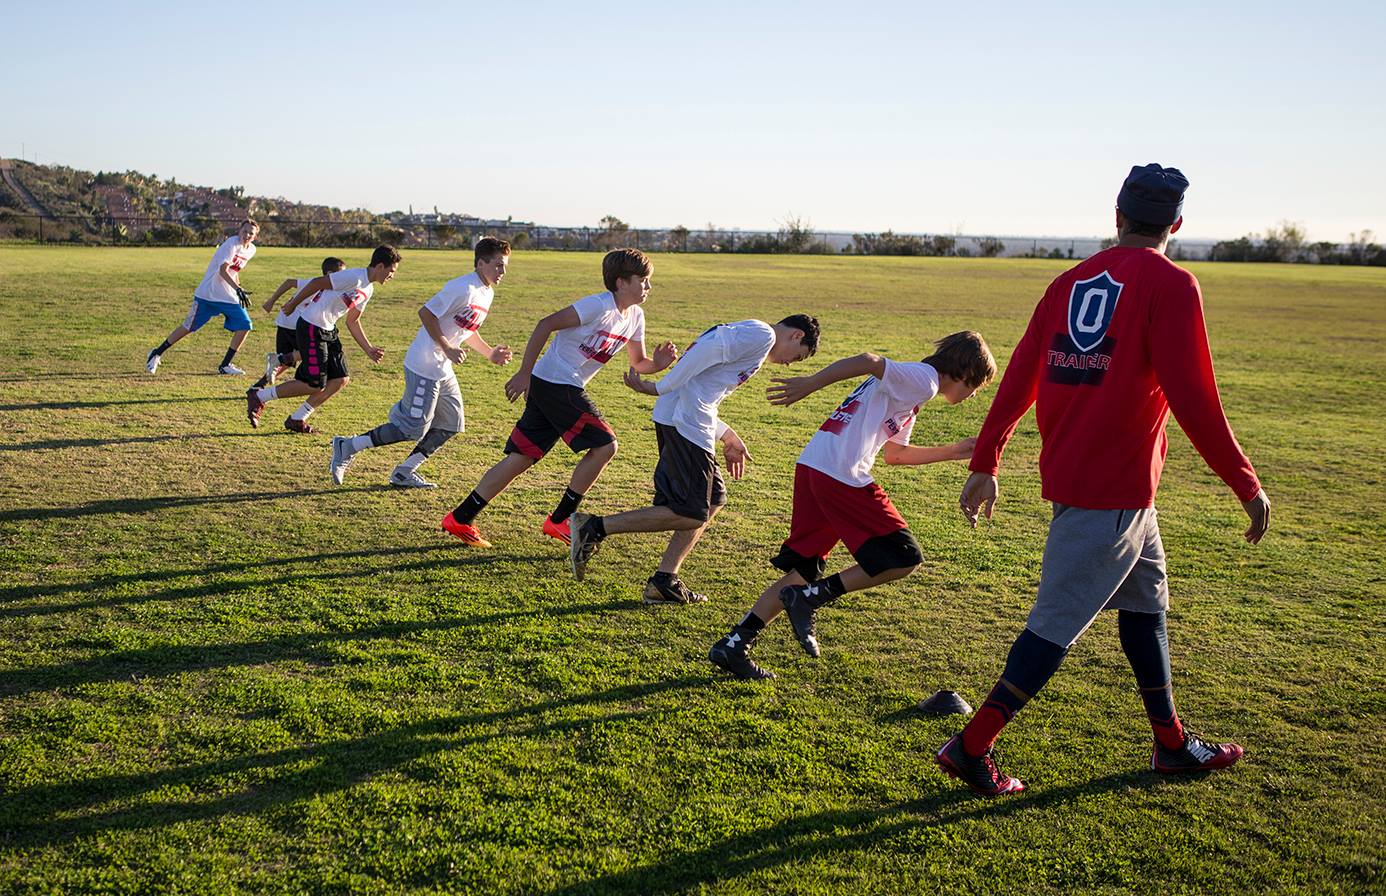 featured image of the blog titled "Looking for Youth Soccer Training in Phoenix? Discover Octane Performance Training!"